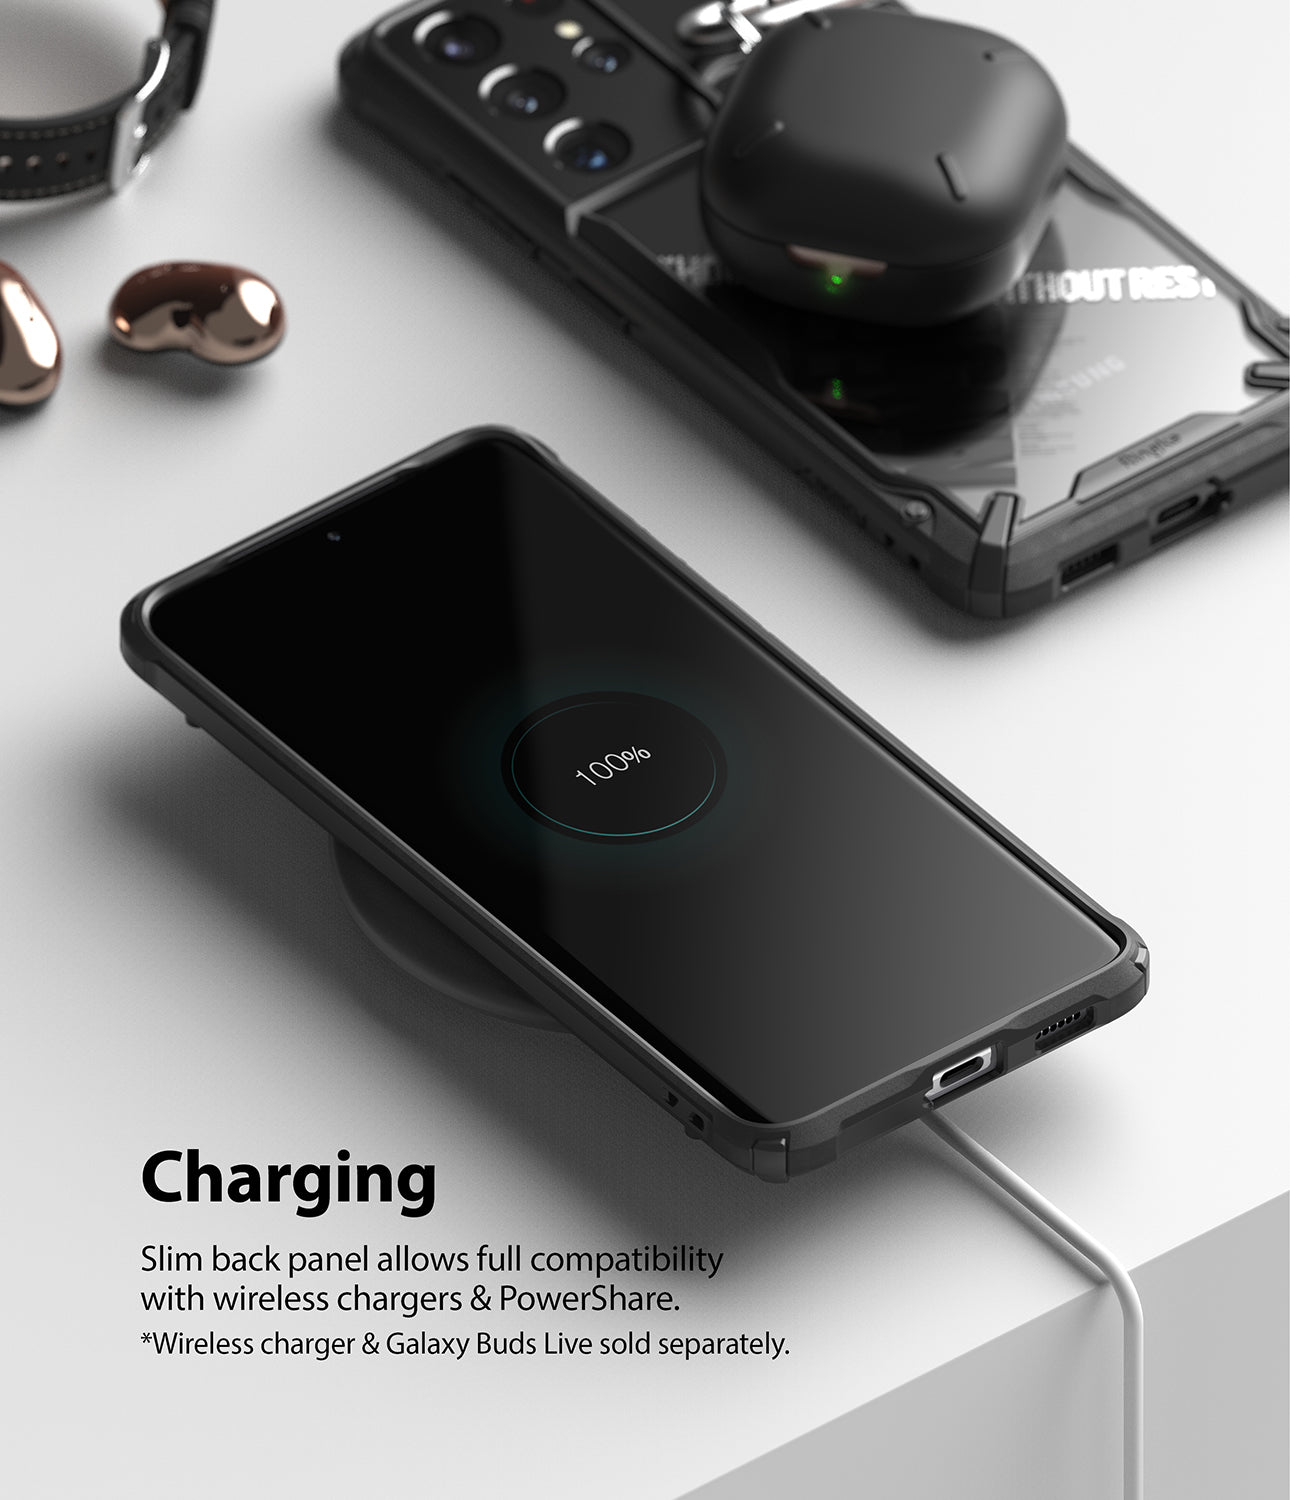 compatible with powershare and wireless charging